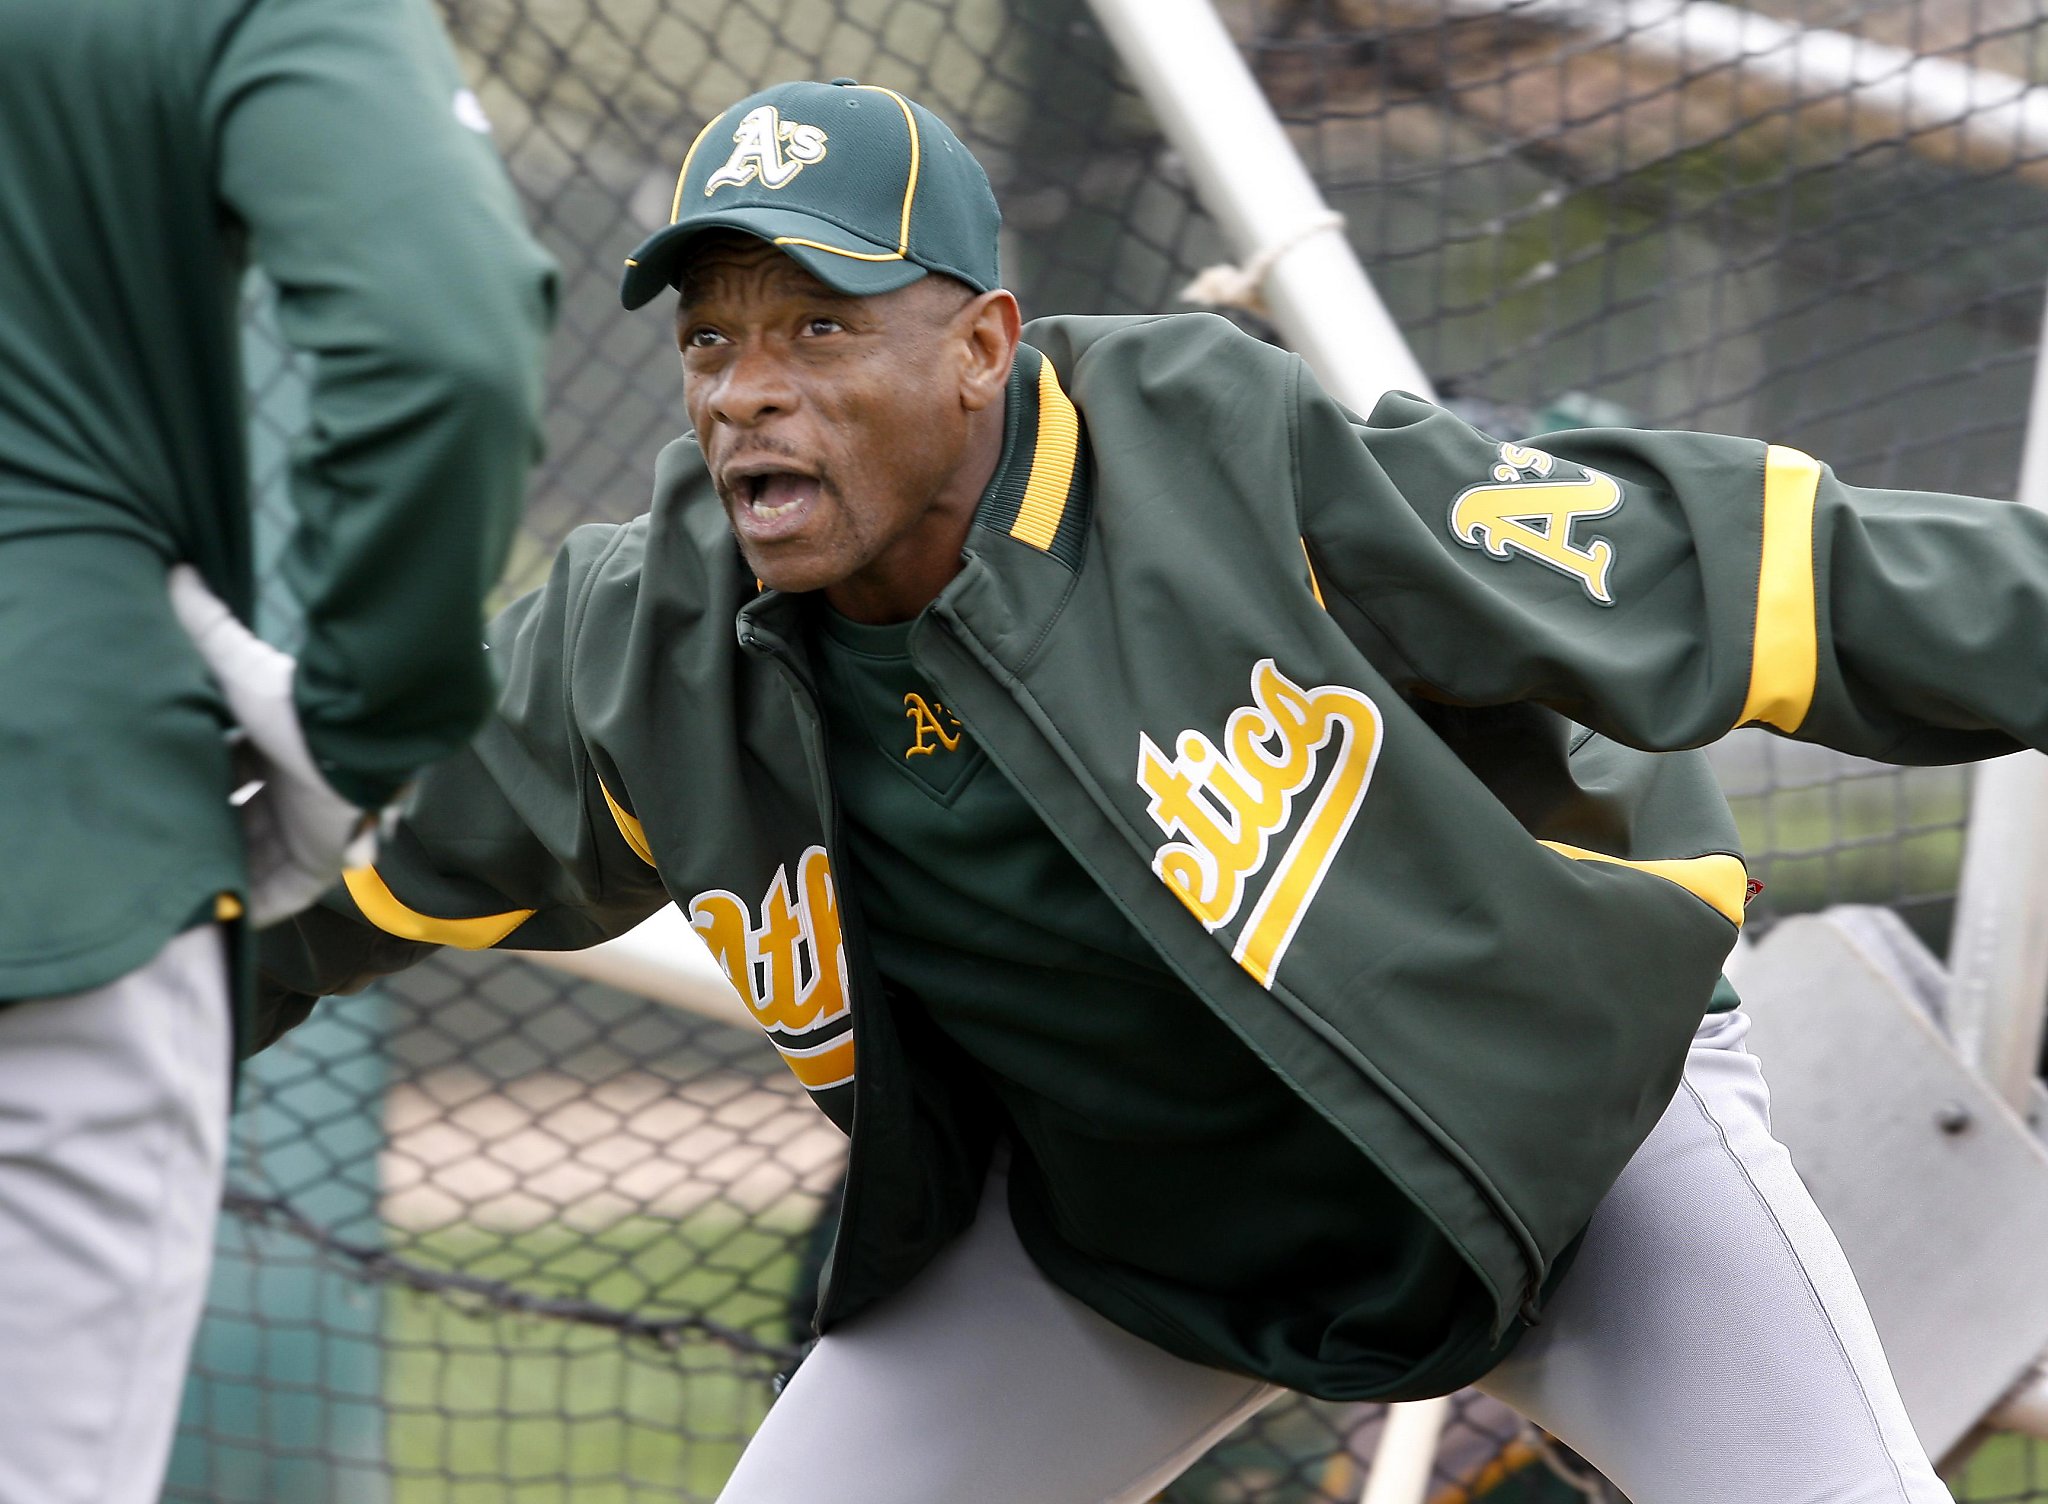 A's honor Rickey Henderson by naming field after Hall of Famer